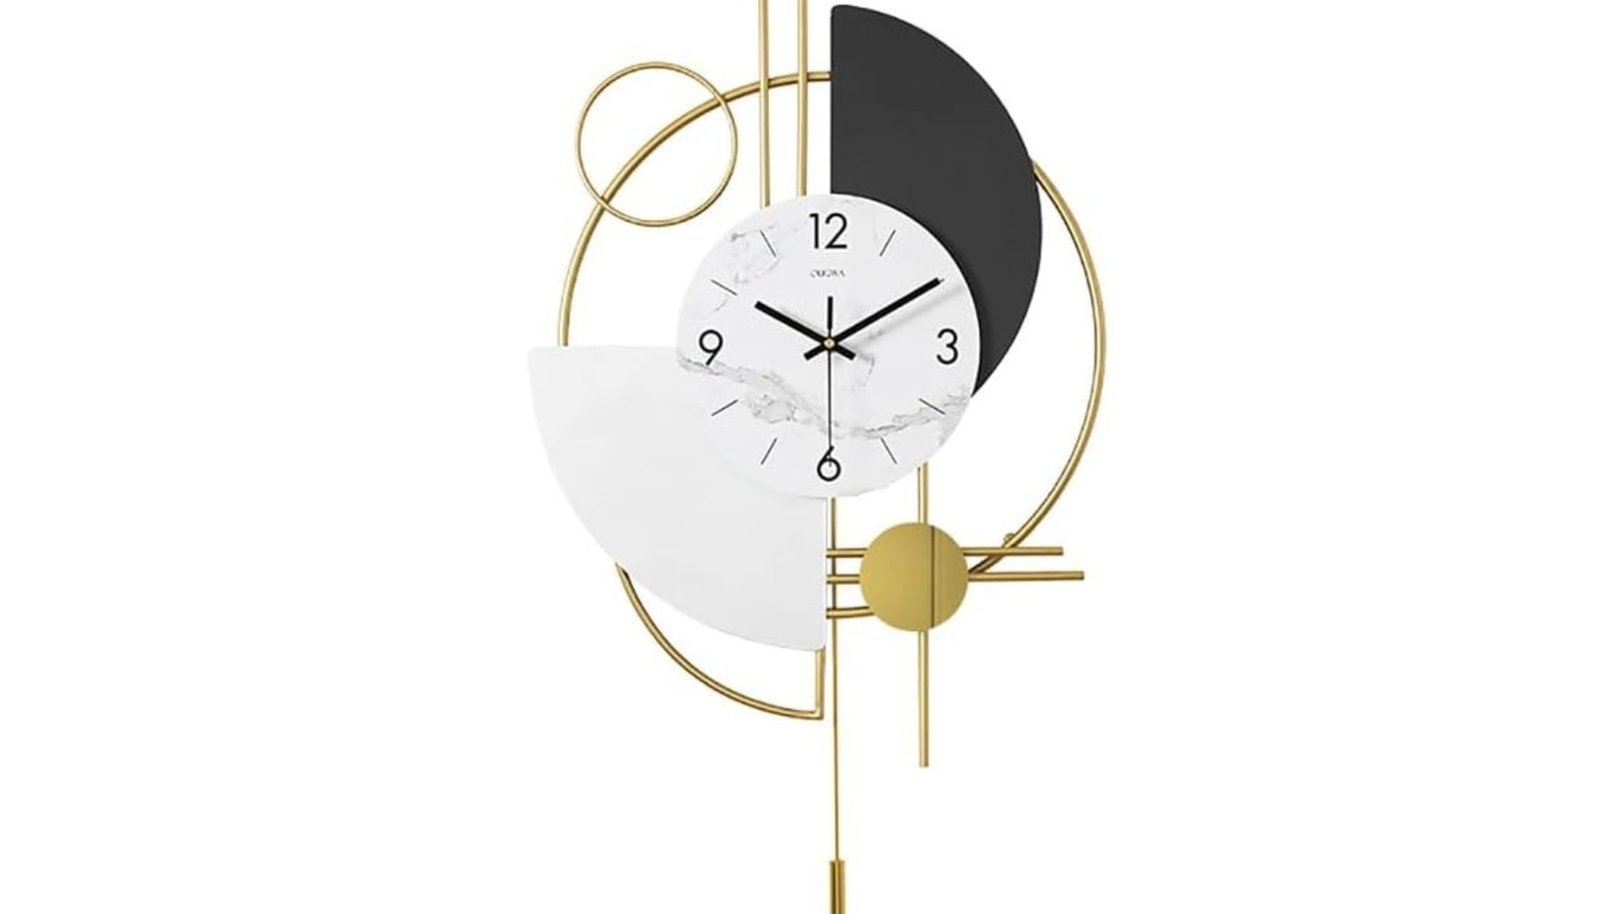 Homary 16.5-Inch Decorative Big Modern Wall Clock Review